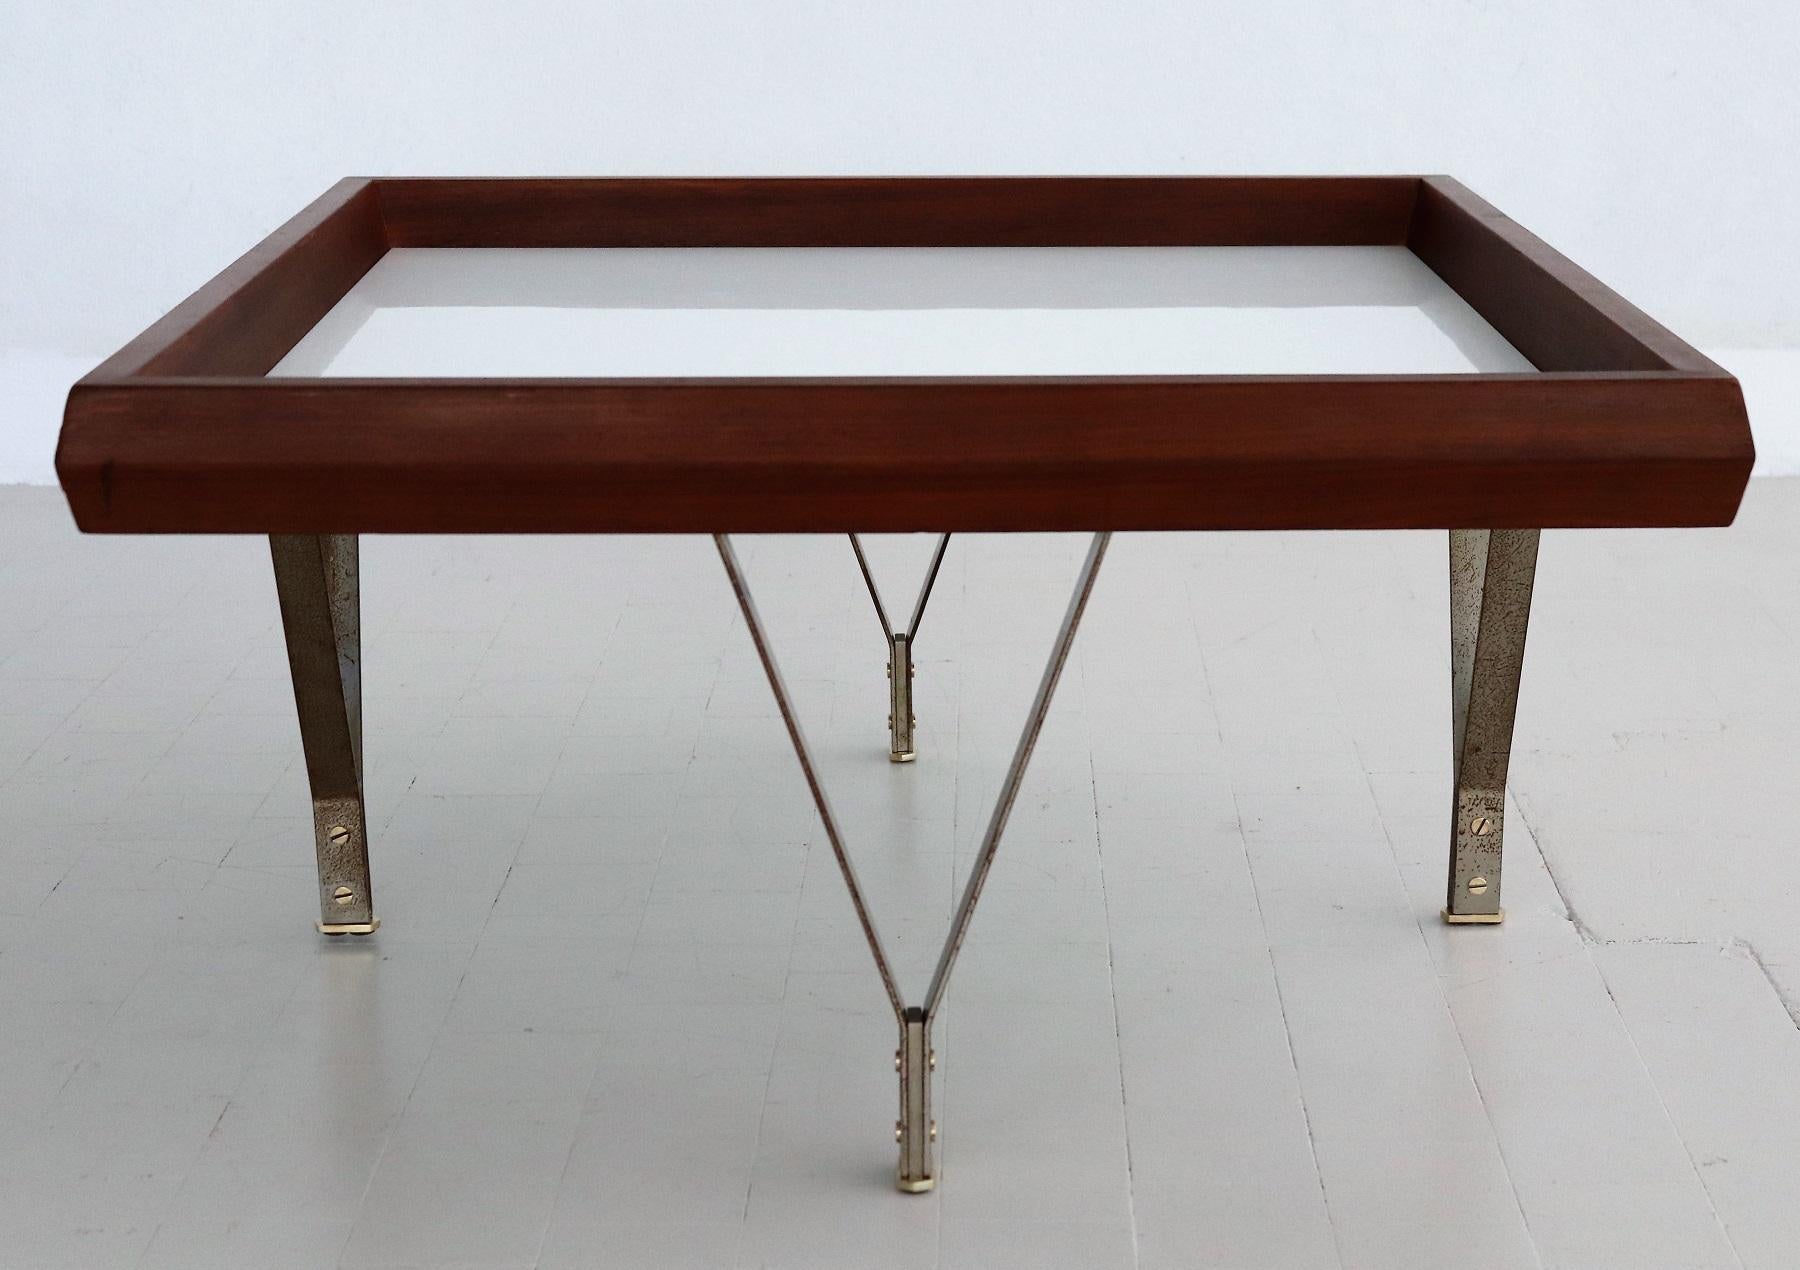 Italian Midcentury Modern Coffee Table in Mahogany and Glass, 1960s 2